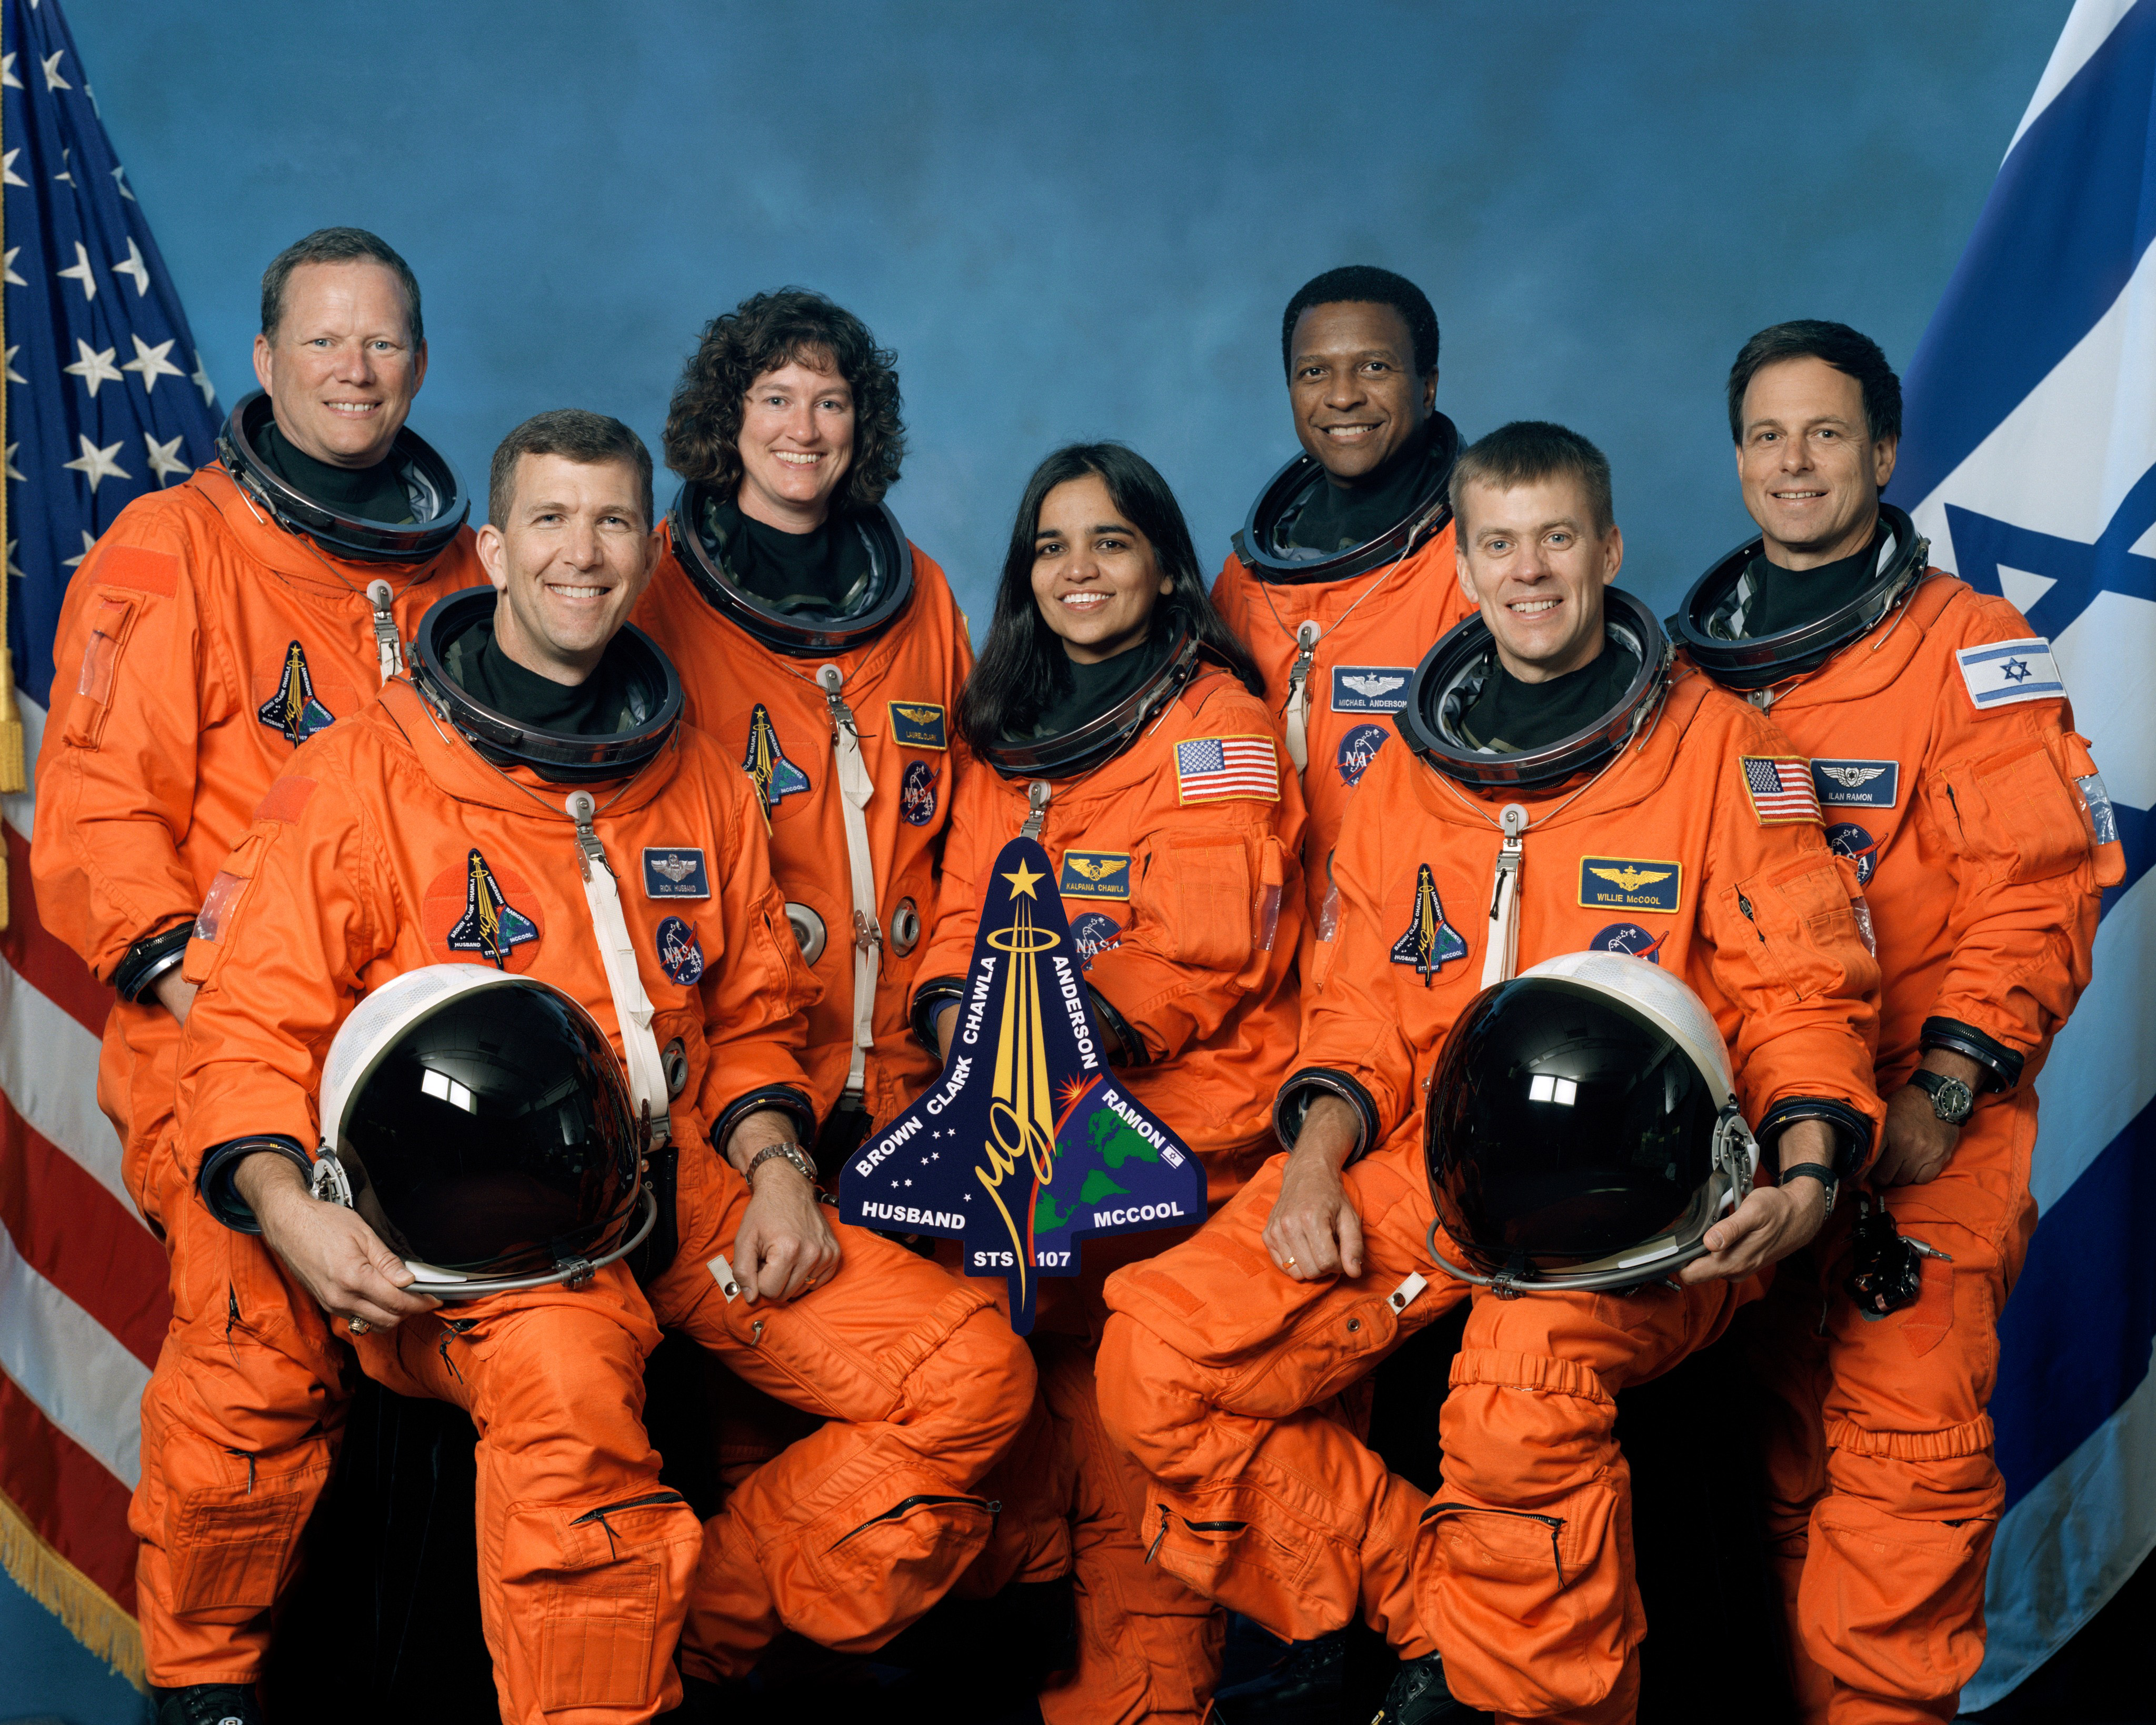 http://upload.wikimedia.org/wikipedia/commons/0/04/Crew_of_STS-107,_official_photo.jpg